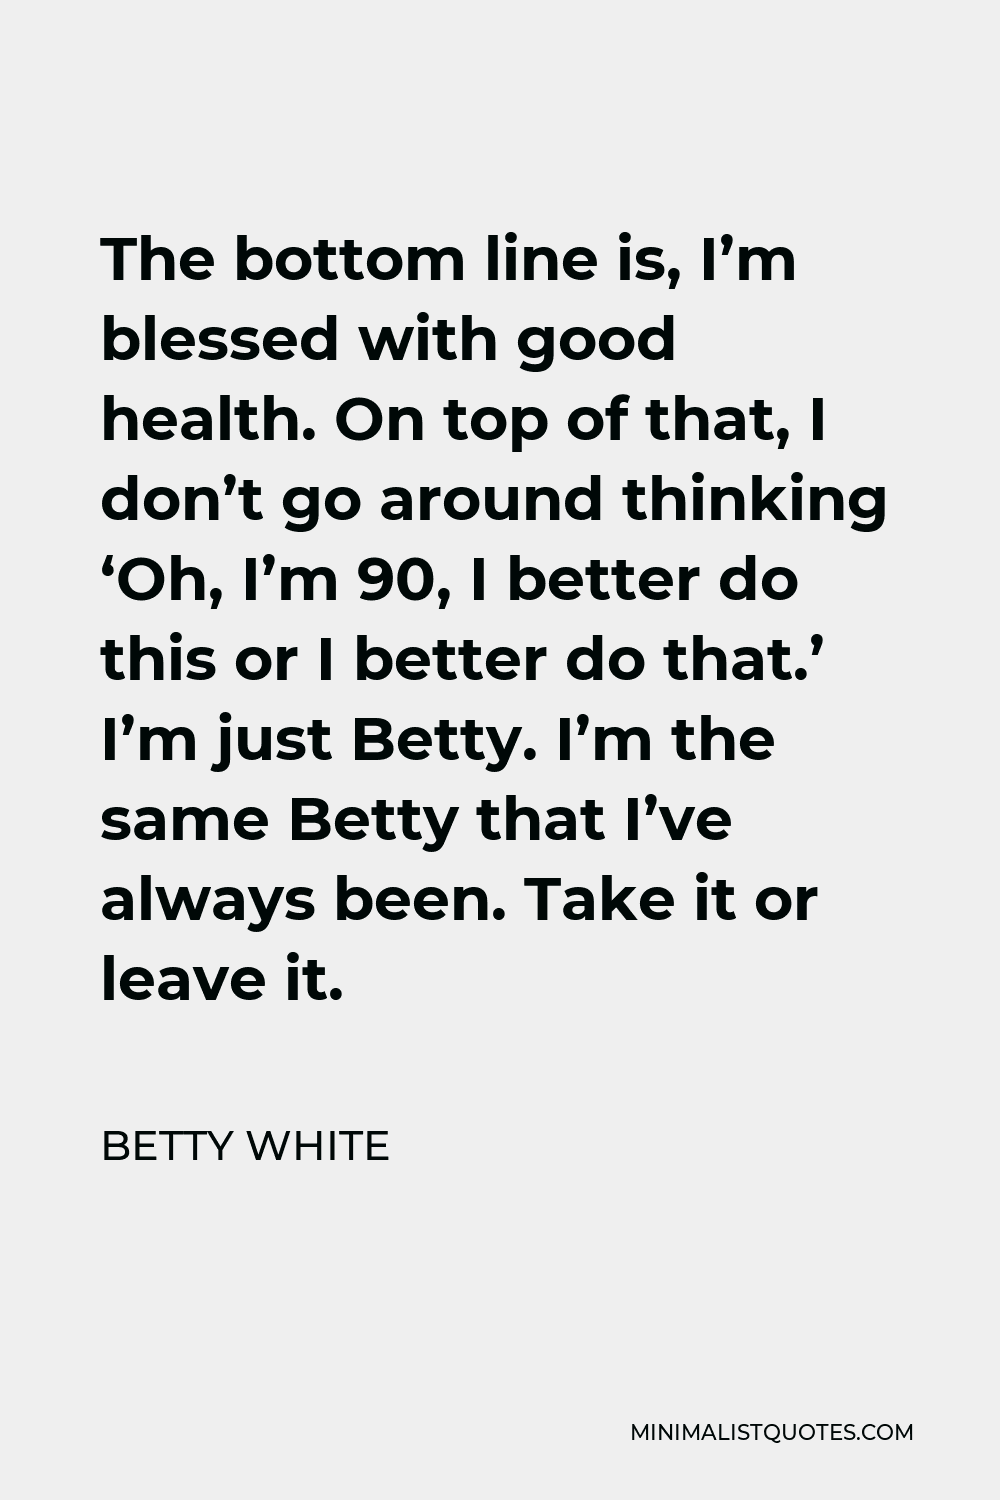 Betty White Quote - The bottom line is, I’m blessed with good health. On top of that, I don’t go around thinking ‘Oh, I’m 90, I better do this or I better do that.’ I’m just Betty. I’m the same Betty that I’ve always been. Take it or leave it.